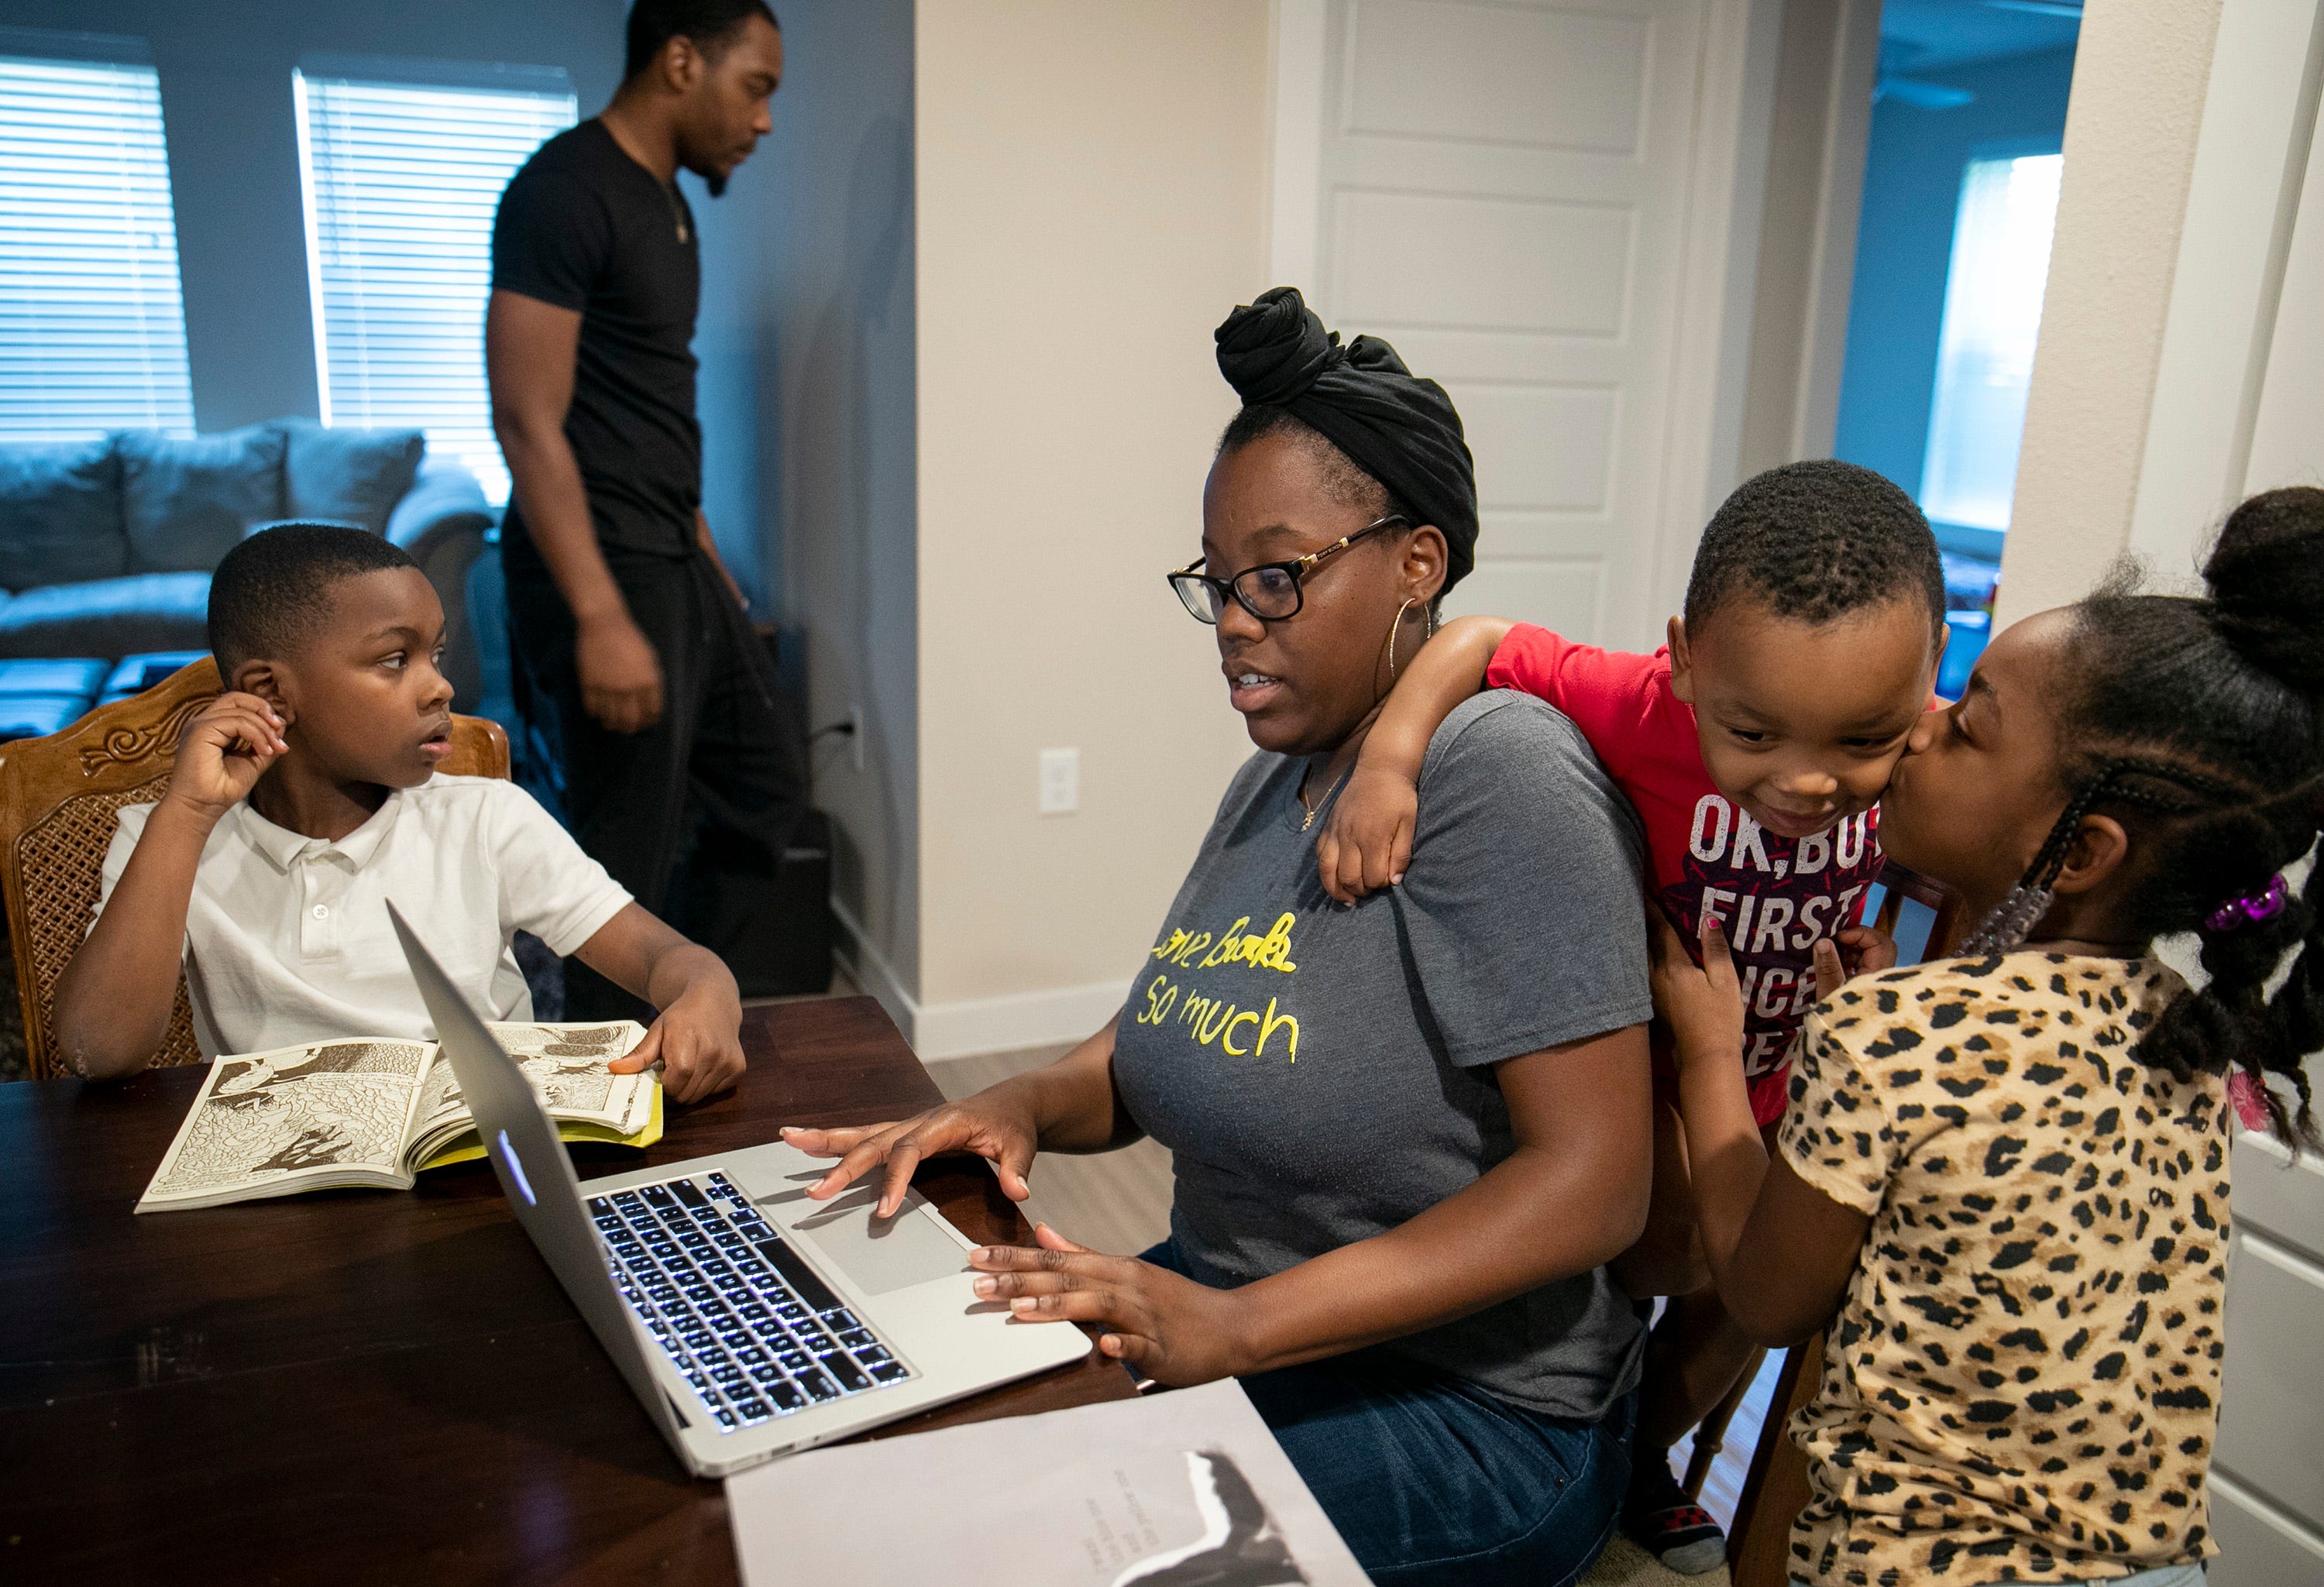 Amber Fowler, a teacher at Brooke Elementary School, tries to login to her school portal to do some work, while sharing space with her husband Jacolby Scott, and their children, Javon Scott, 7, from left, Jacolby Scott Jr., 2, and Jamiyah Scott, 5, at their apartment in South Austin on Wednesday March 25, 2020.  The family is stuck at home while schools are shut down due to the coronavirus pandemic.